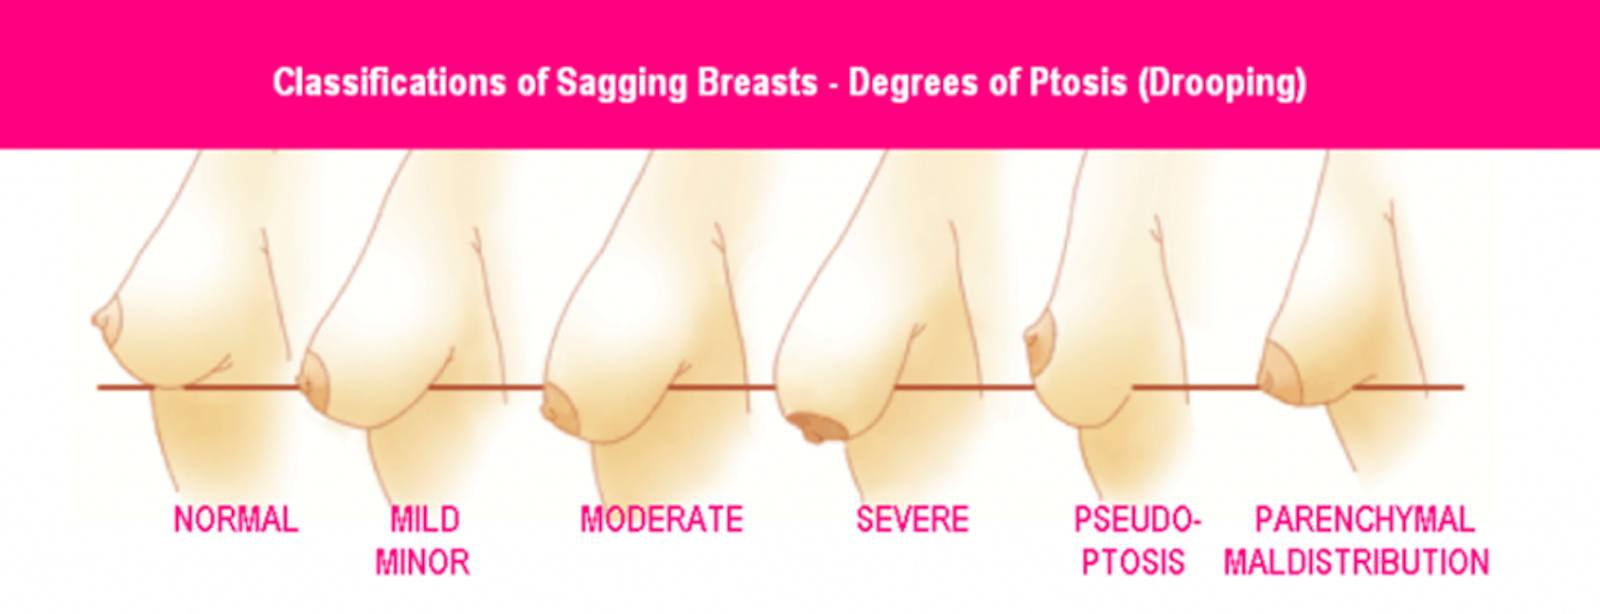 Carmen Munteanu Plastic Surgeon Cosmetic Blog - Solutions for Sagging Dropping Breasts Image of Classifications of Ptosis